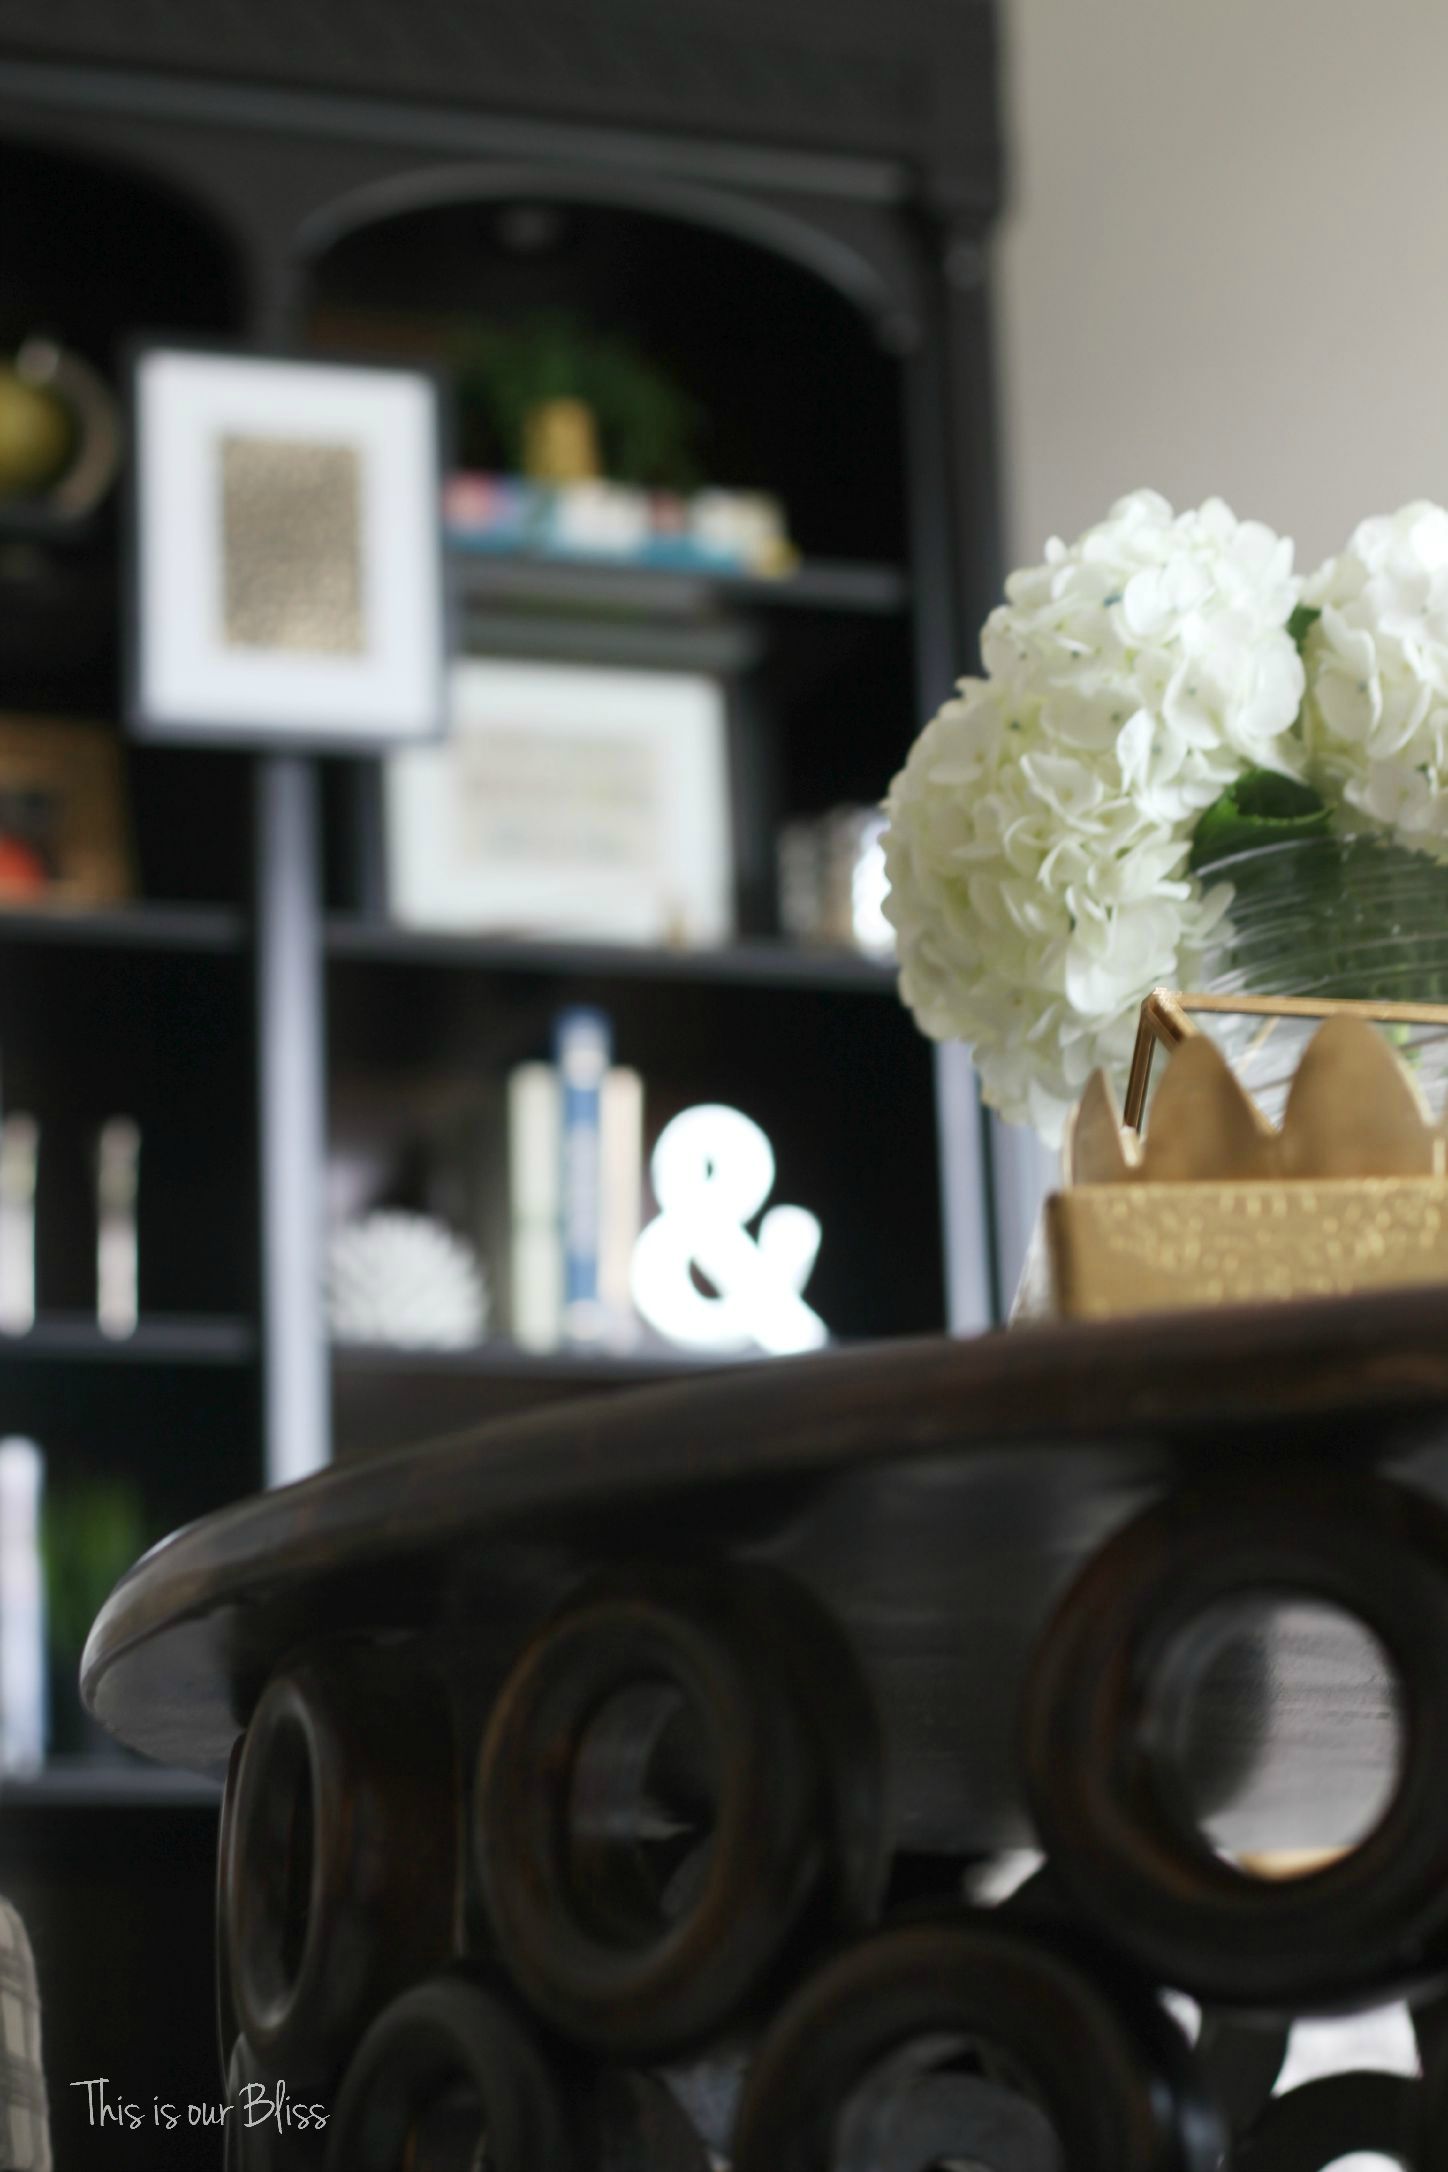 How to style a coffee table - coffee table styling - elements of a well-styled coffee table - coffee table detail - living room bookcase - fresh flowers - Back to Basics - This is our Bliss